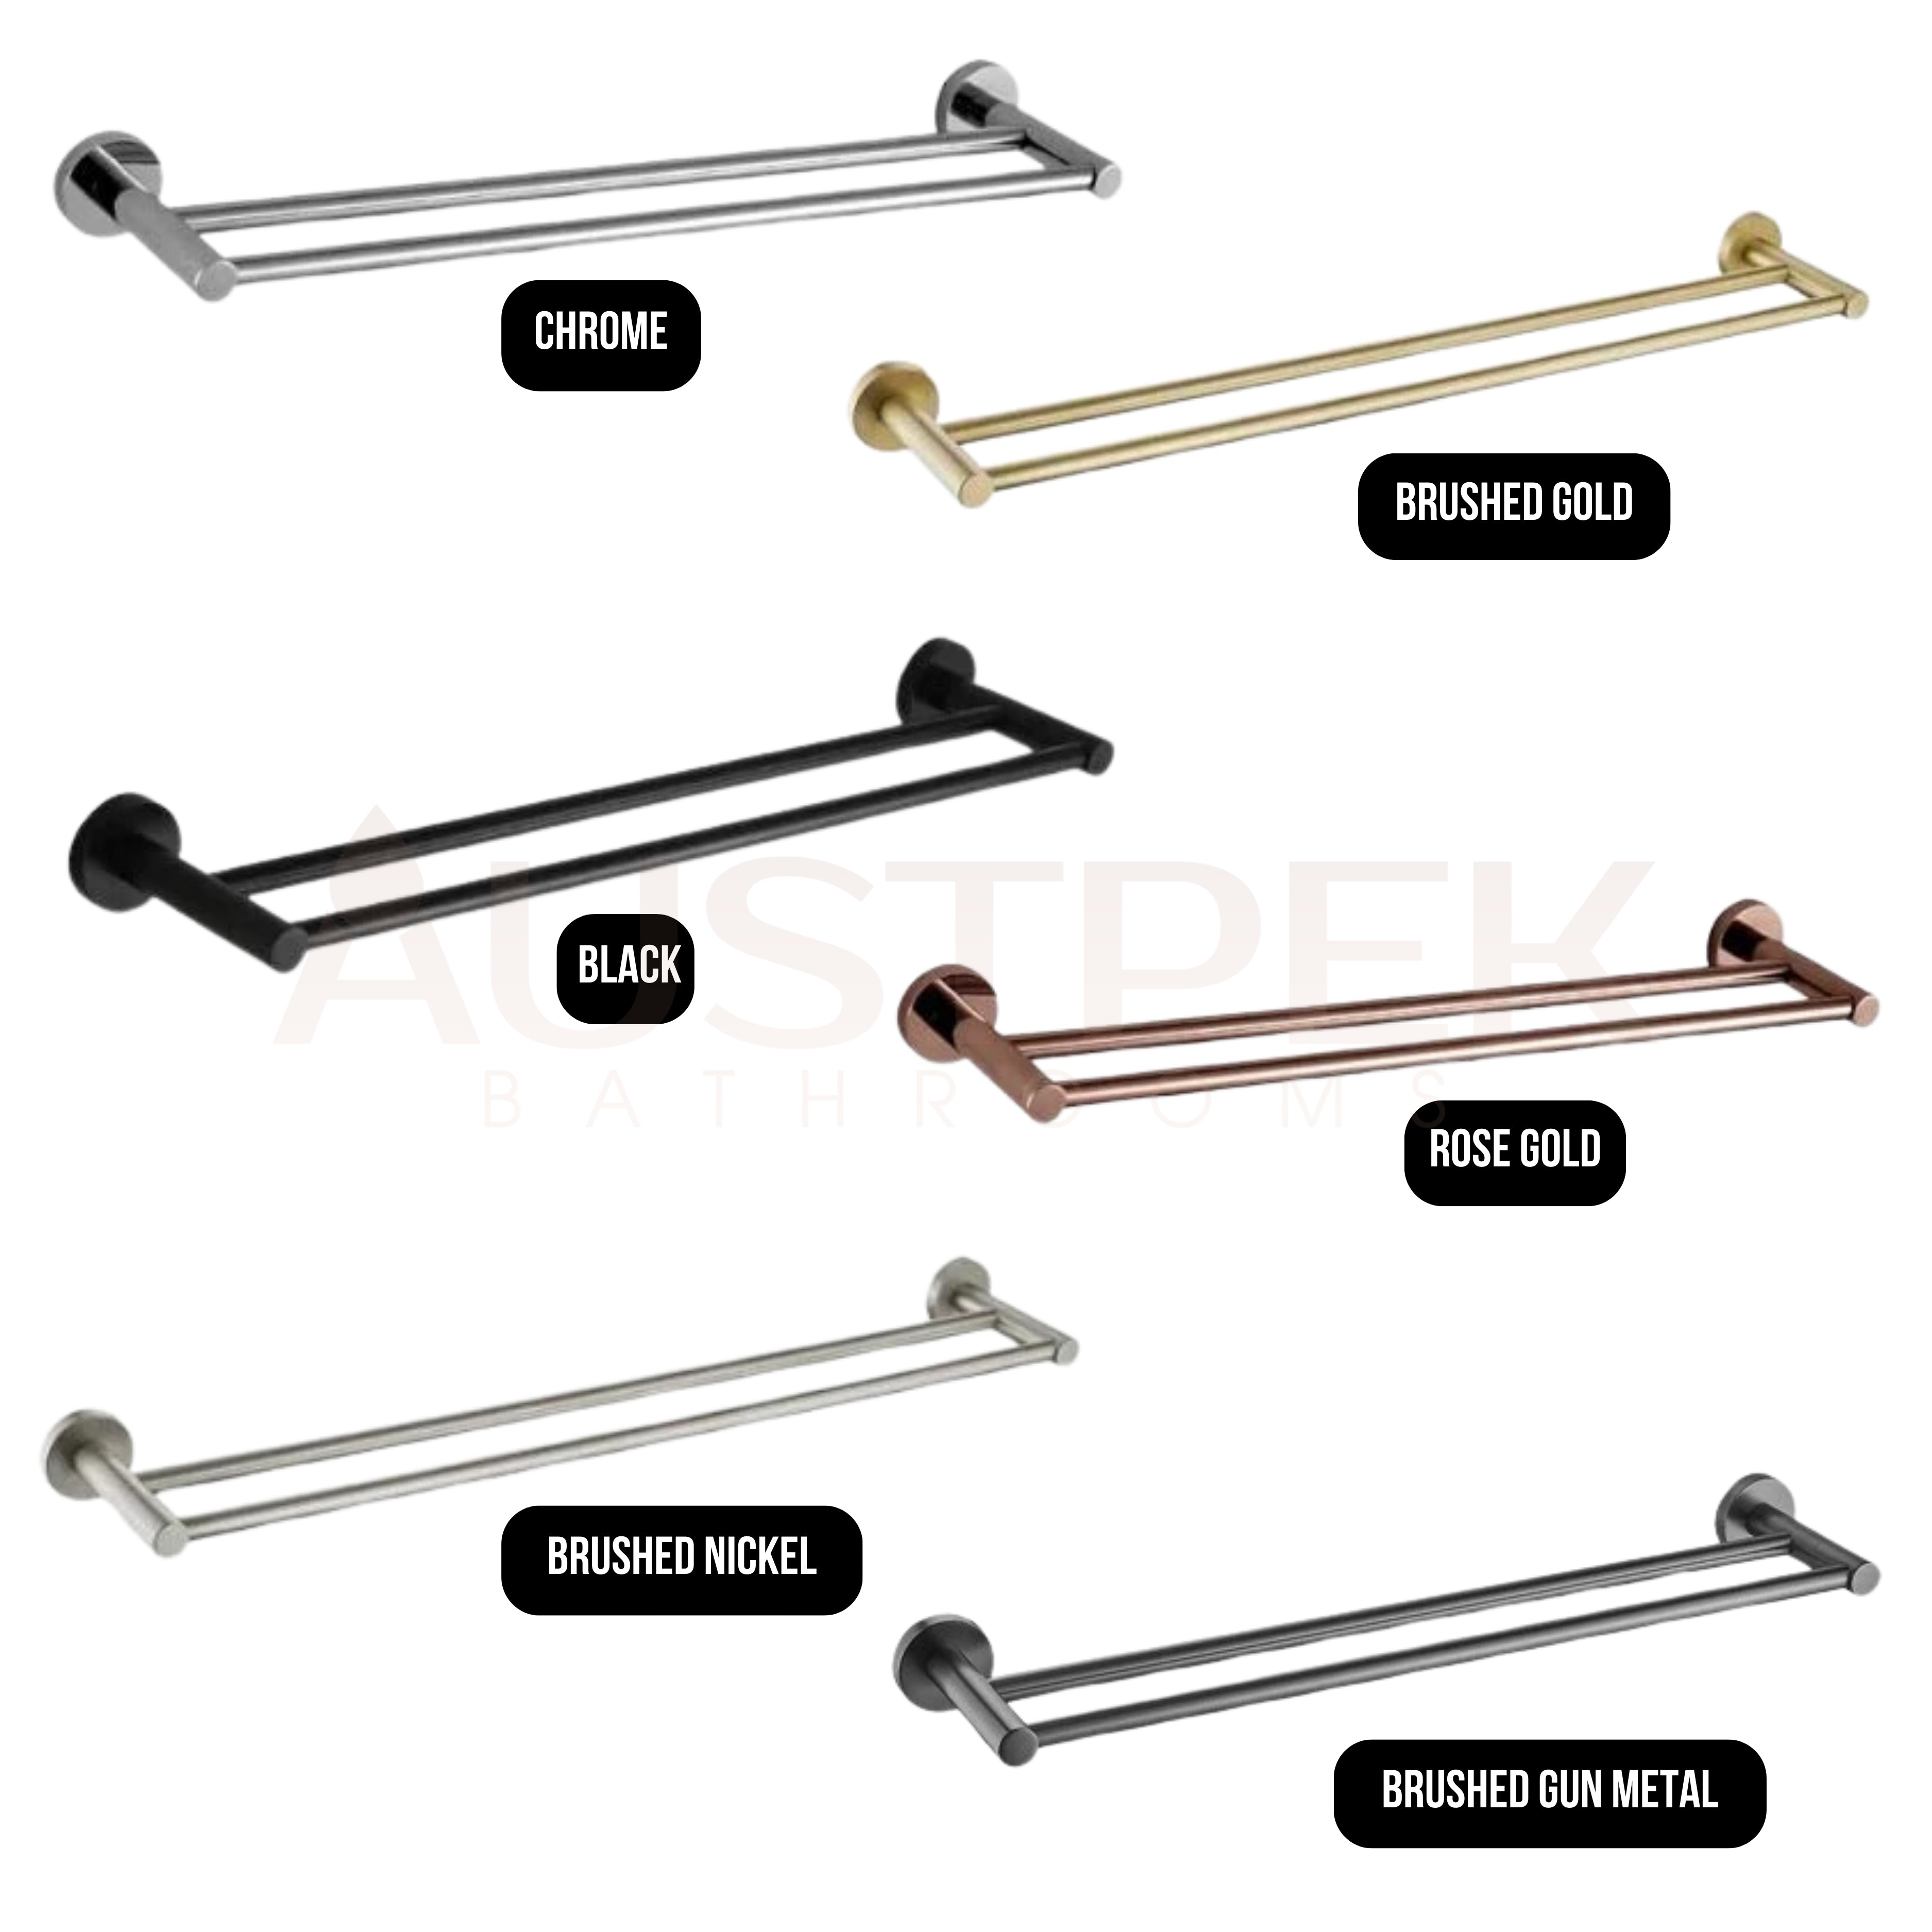 HELLYCAR IDEAL DOUBLE NON-HEATED TOWEL RAIL ROSE GOLD 600MM, 750MM AND 900MM